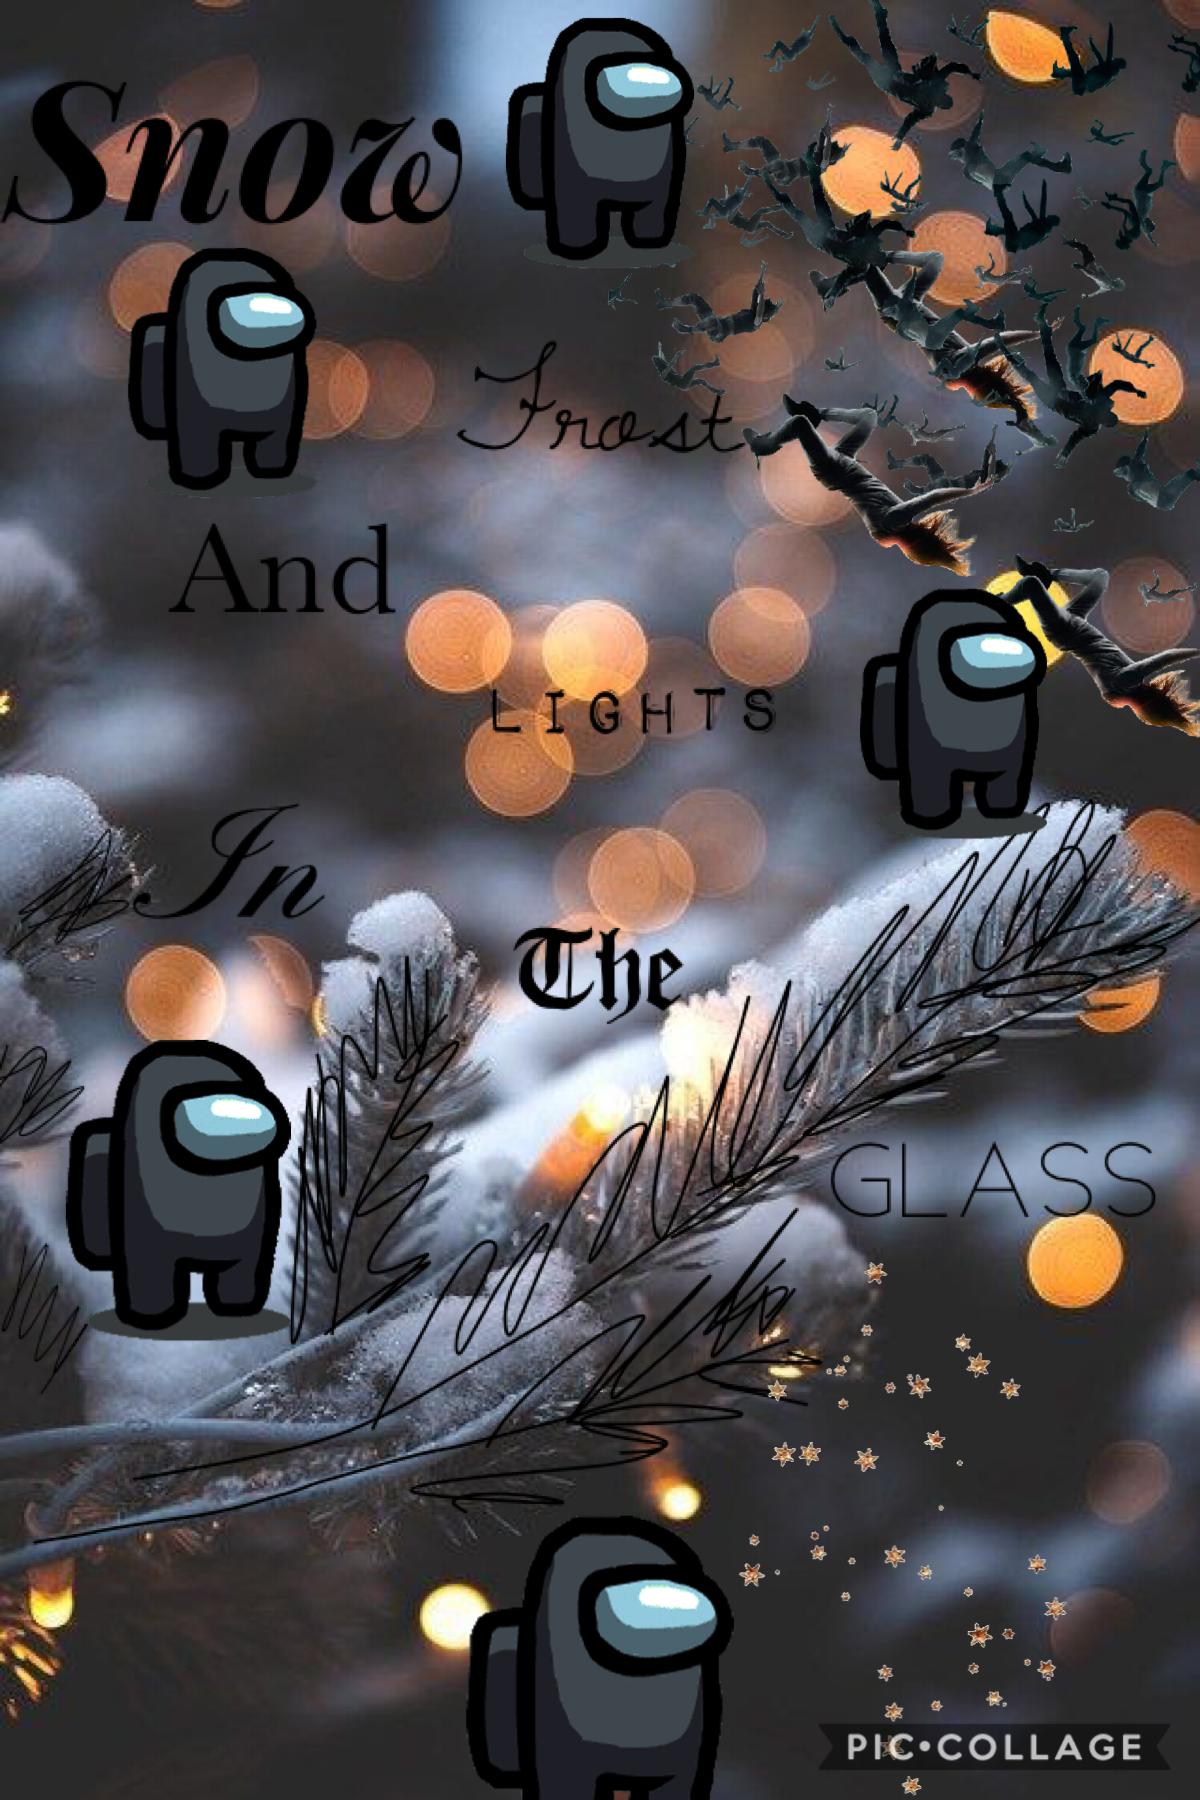 Tap
Hey all!!! This is my first collage on my new iphone 7!(so ill prob get phonto soon!!!)
I decided to make a “Christmas” collage with an Among us twist because im addicted to that game haha
QOTD:do you like among us?
ADOT:Adicted to it 
Please rate 1-1